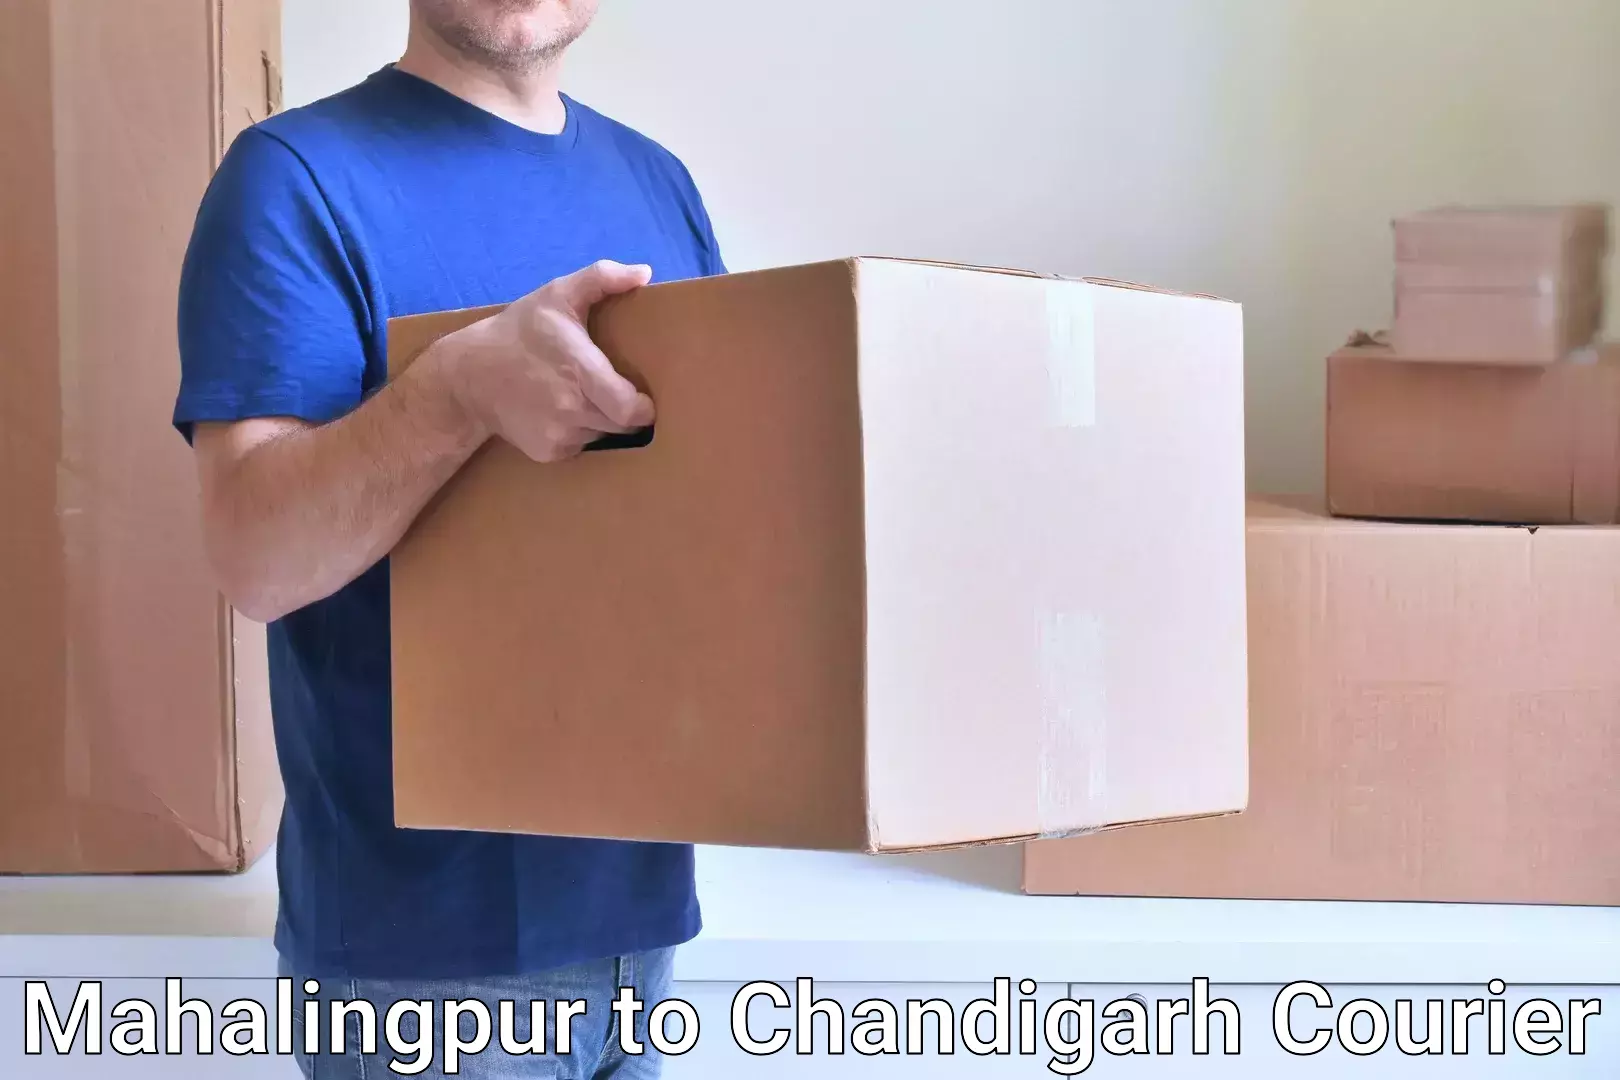 Personalized courier experiences Mahalingpur to Chandigarh